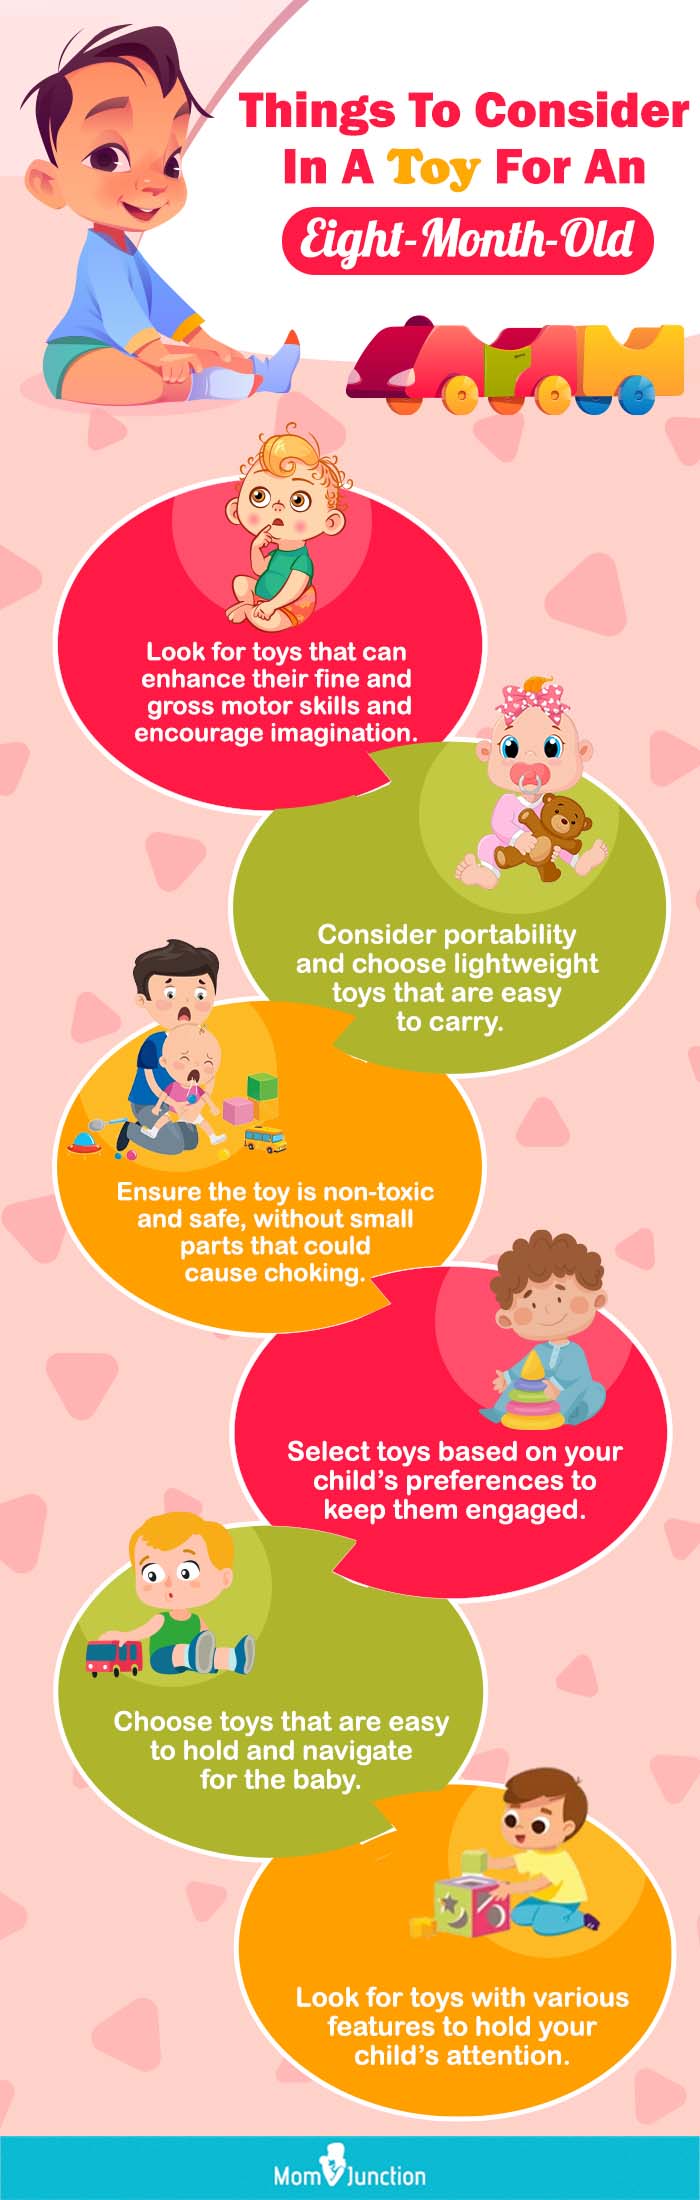 Things To Consider In A Toy For An Eight-Month-Old (infographic)